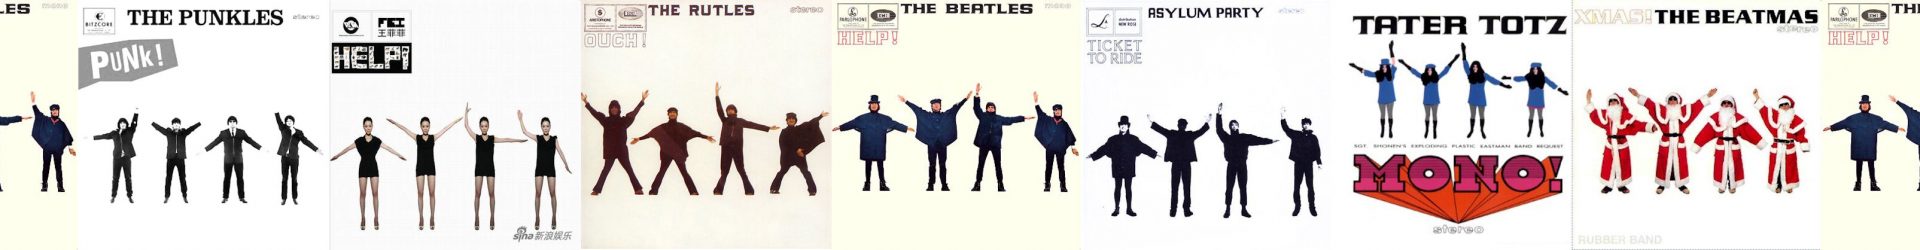 THE BEATLES: Lady Madonna – HUMPHREY LYTTELTON AND HIS BAND: Bad Penny Blues